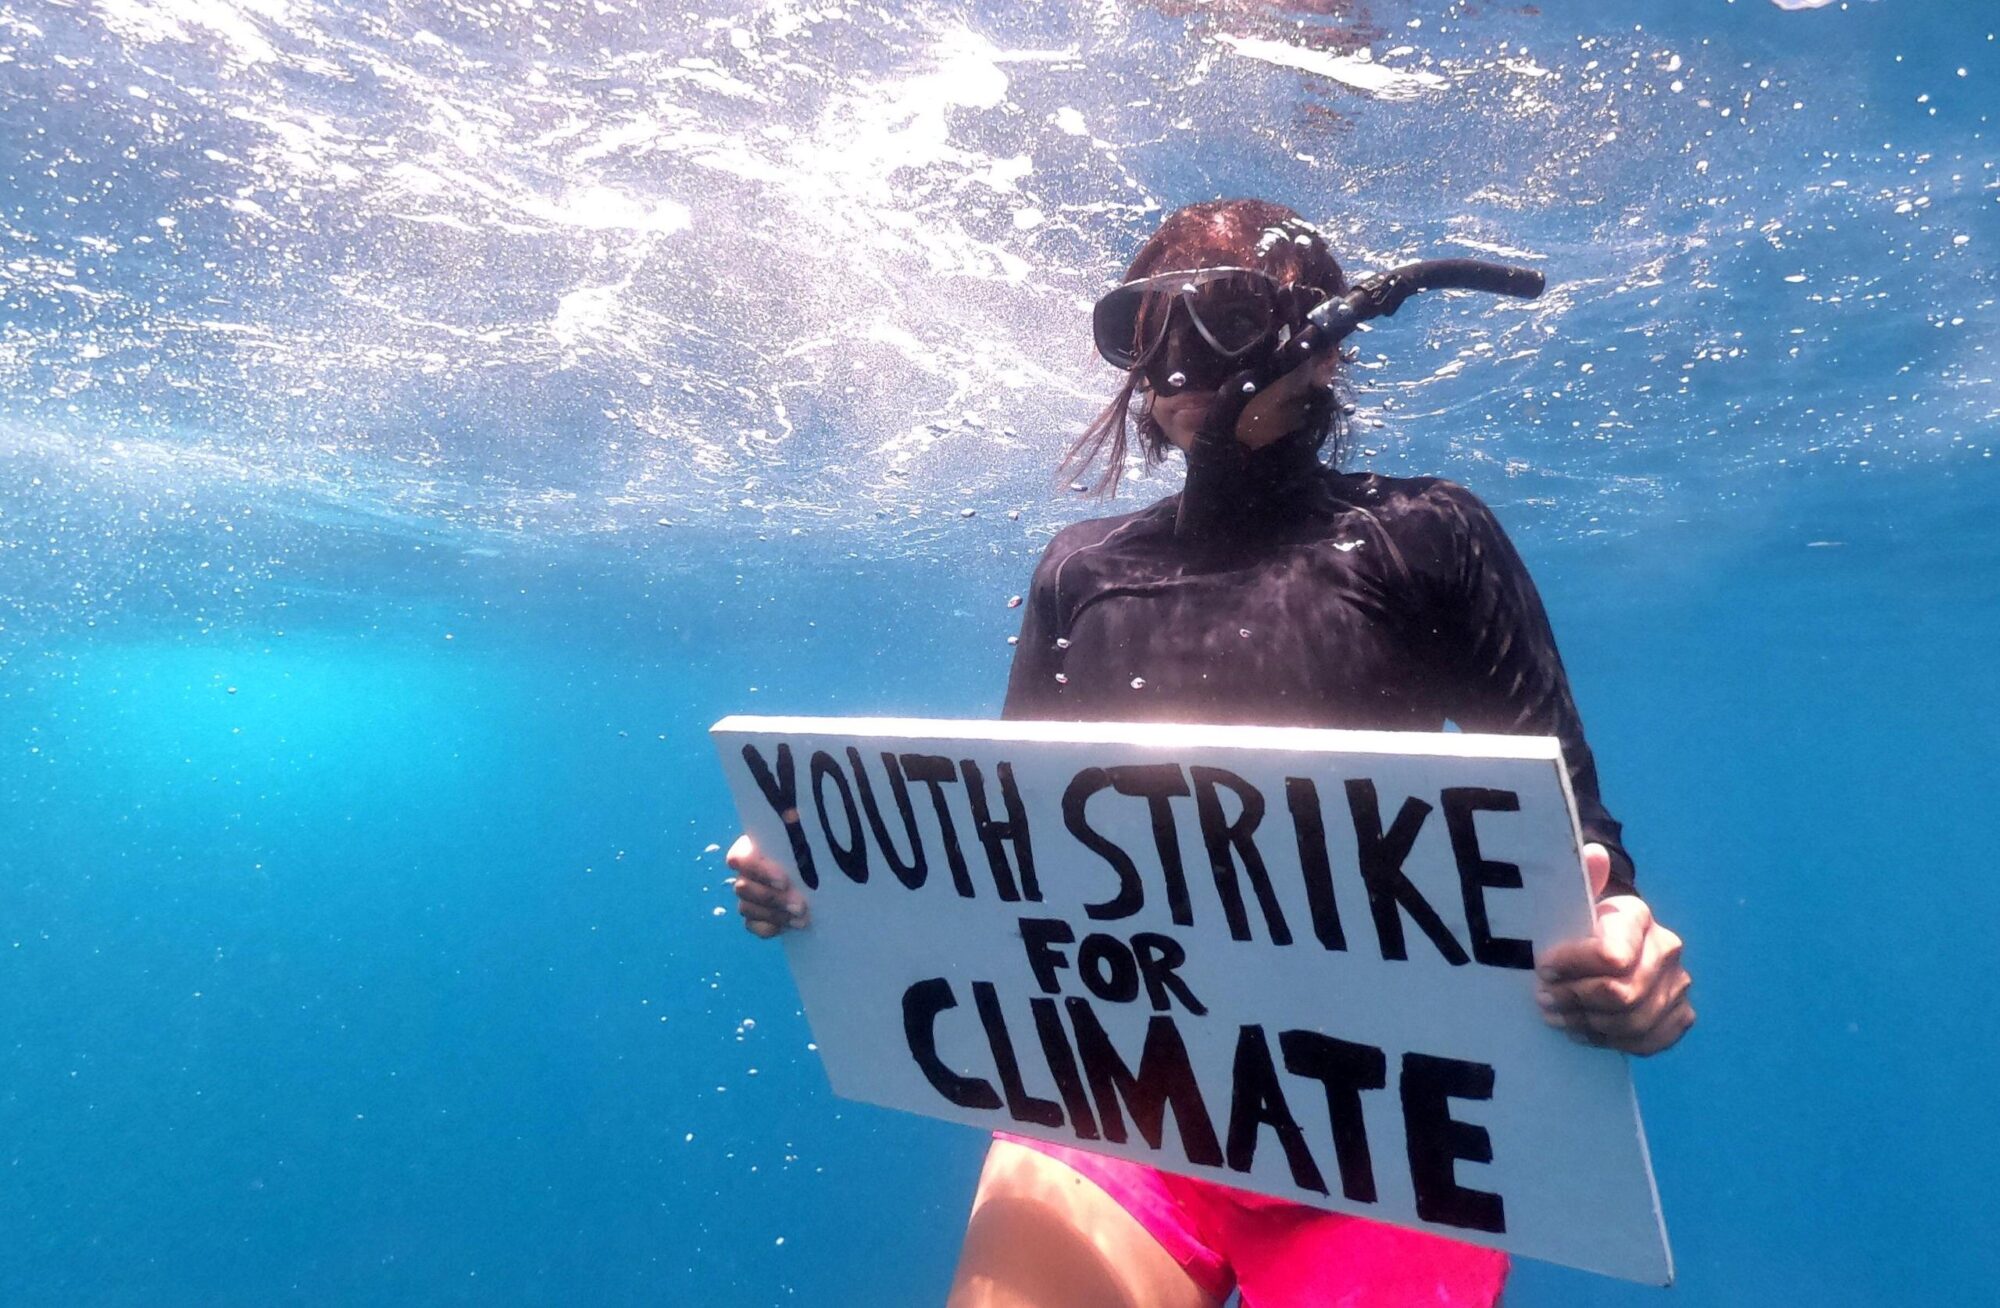 Mauritian scientist and climate change activist Shaama Sandooyea 24, holds a placard reading Youth Strike For Climate, during an underwater protest at the Saya de Malha Bank to highlight the need to protect the world's largest seagrass meadow